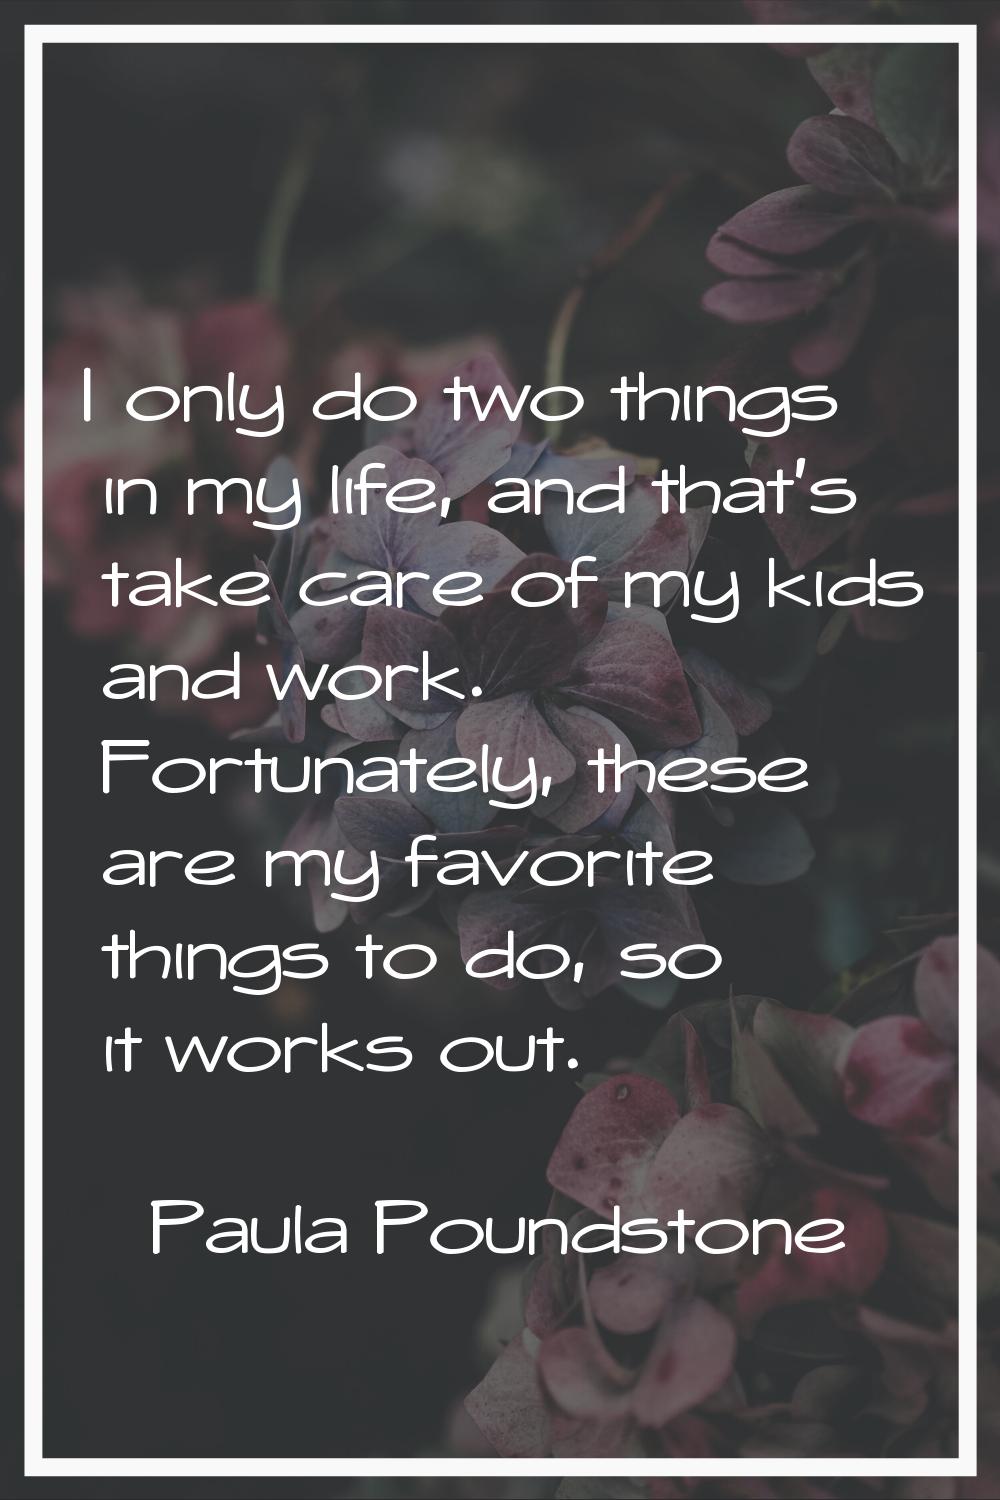 I only do two things in my life, and that's take care of my kids and work. Fortunately, these are m